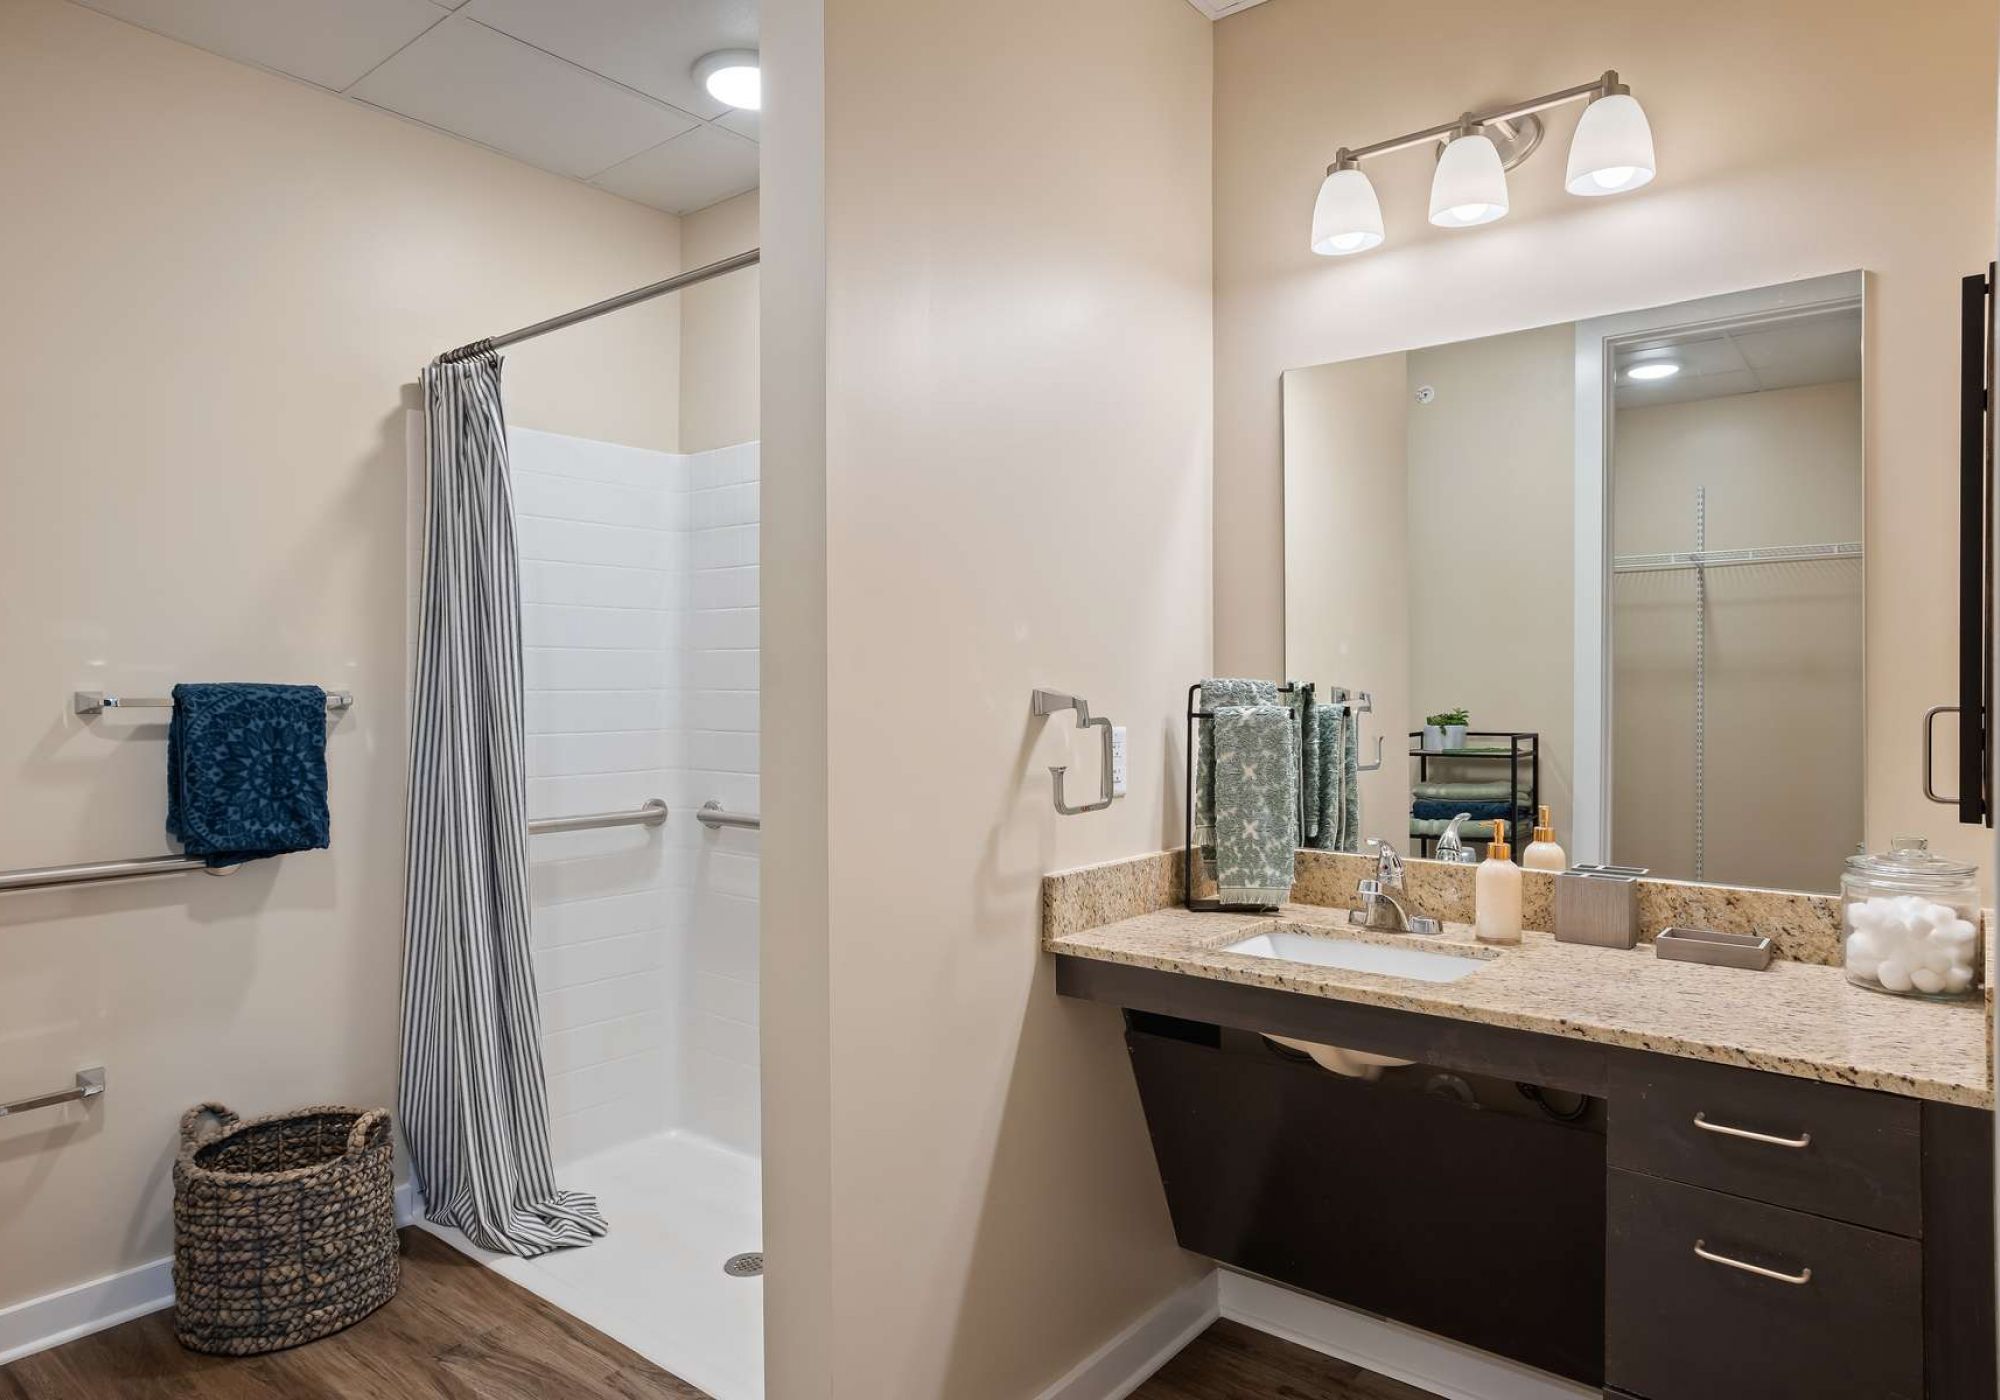 The Claiborne at Gulfport Highlands senior living community bathroom showing accessibility features including handrails, lower sink height, and zero-entry shower